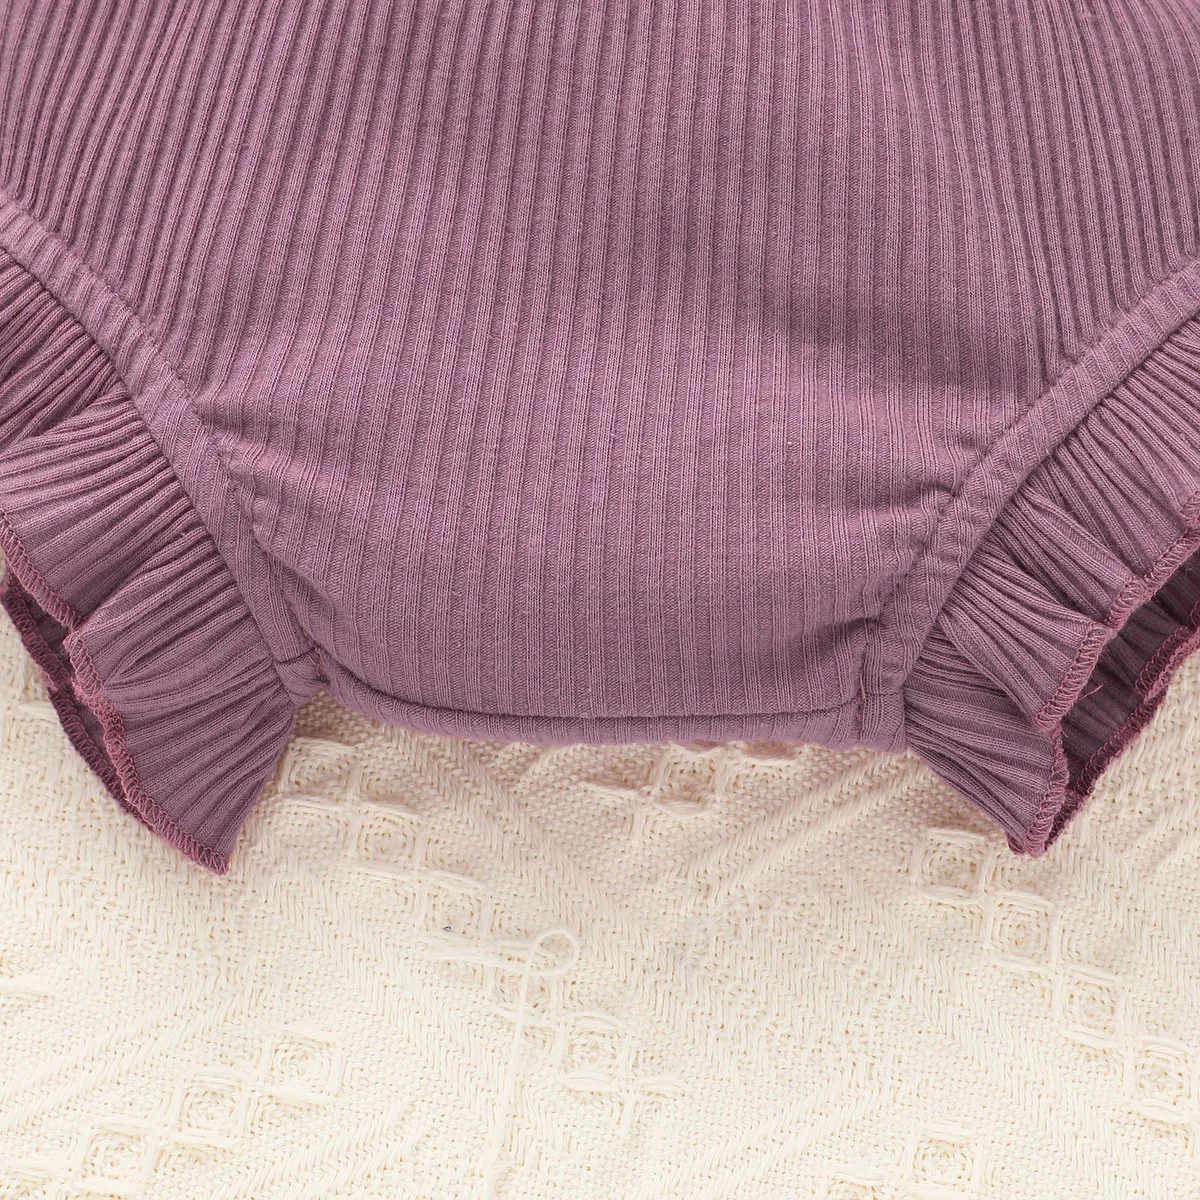 2pcs Baby Girl 95% Cotton Ribbed Flutter-sleeve Romper and Ruffle Shorts Set Purple big image 1